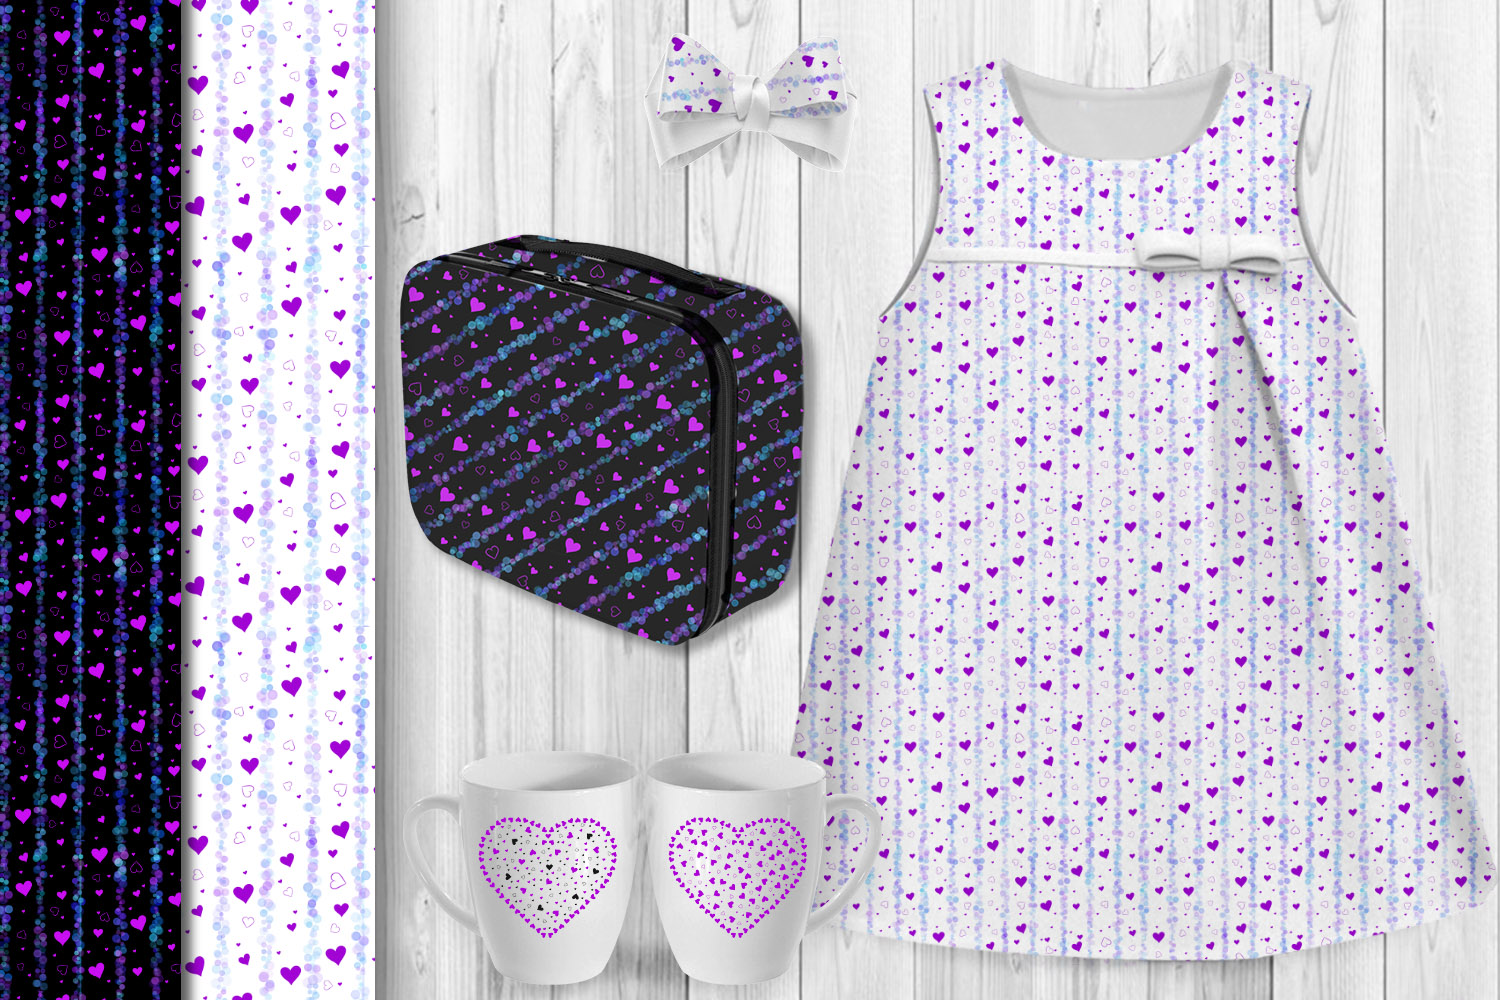 Cups, dresses and cosmetic bag with these hearts prints.